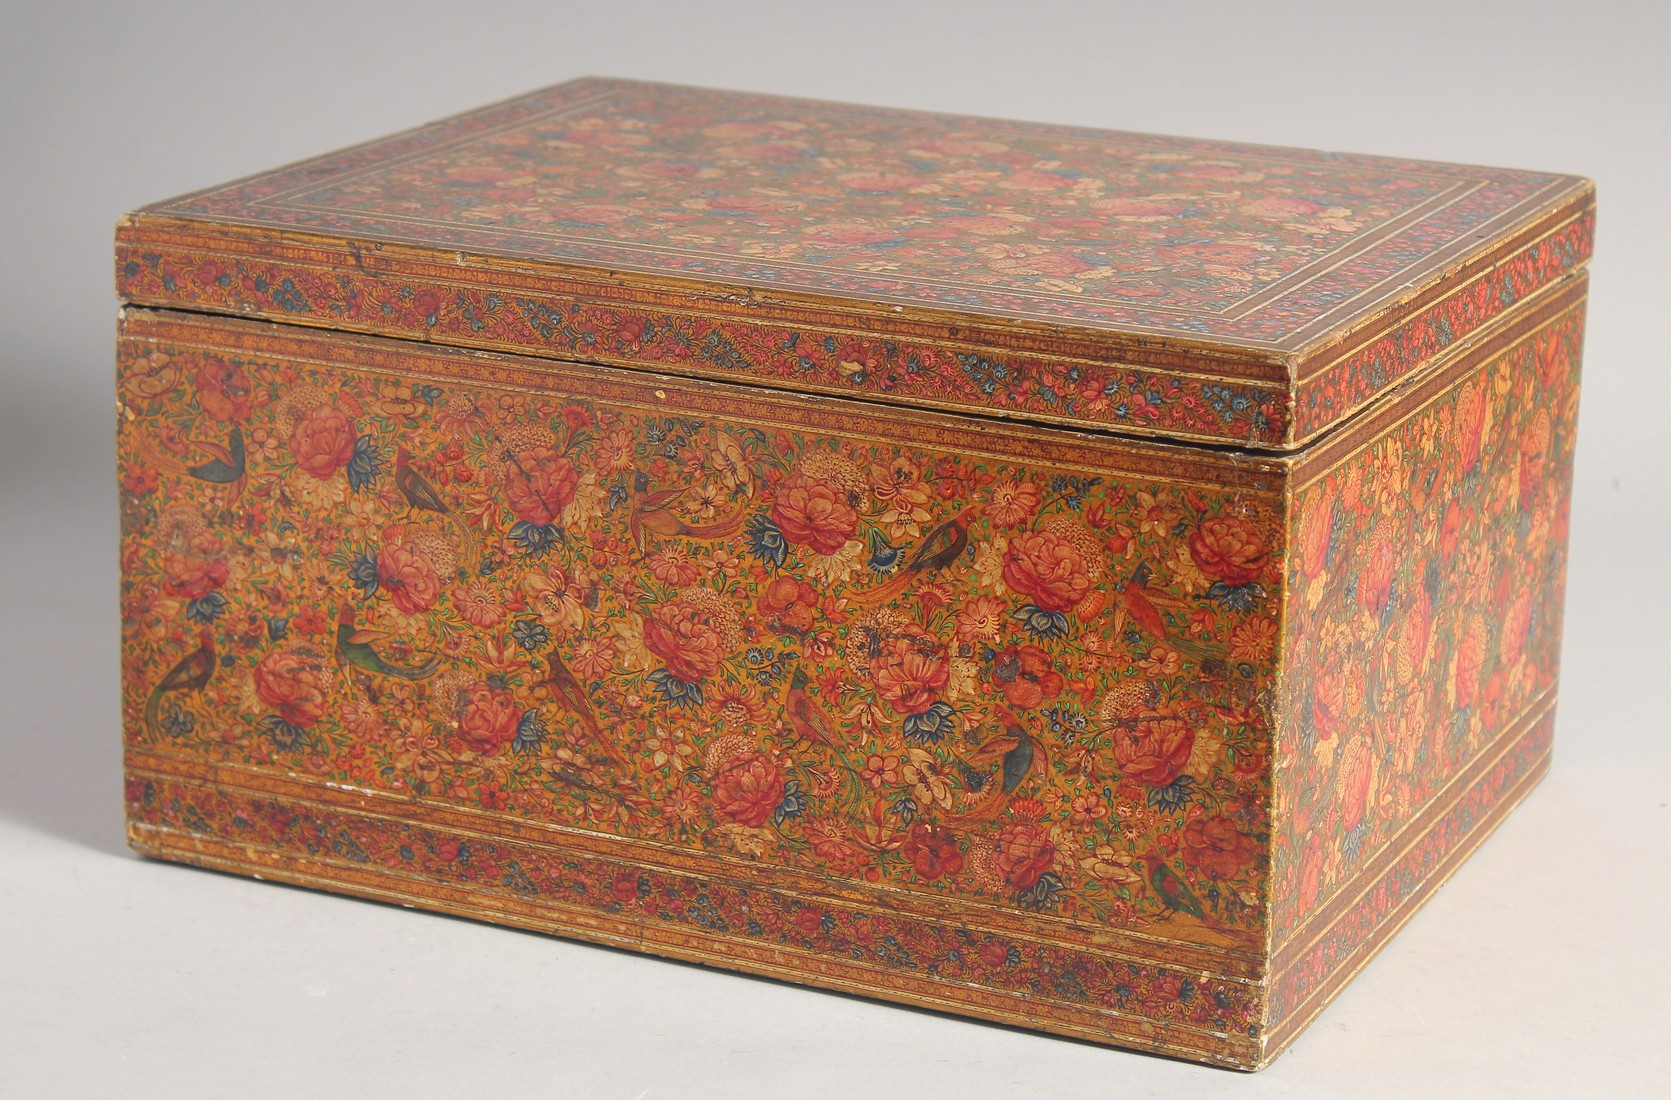 A VERY FINE MID-19TH CENTURY ANGLO-INDIAN KASHMIRI PAINTED, GILDED, AND LACQUERED BOX, depicting